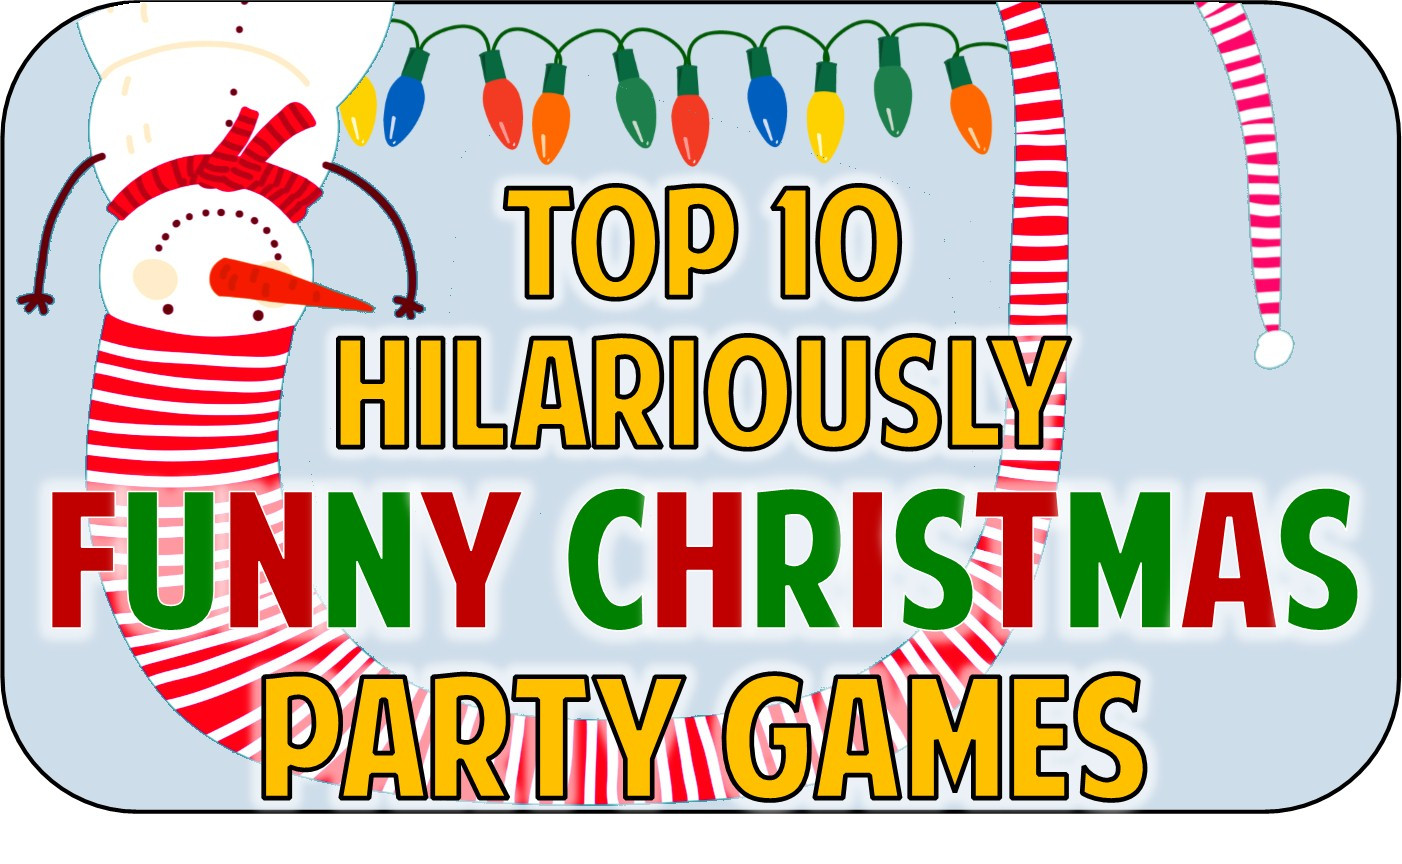 Christmas Party Theme Ideas For Adults
 Christmas Party fice Games